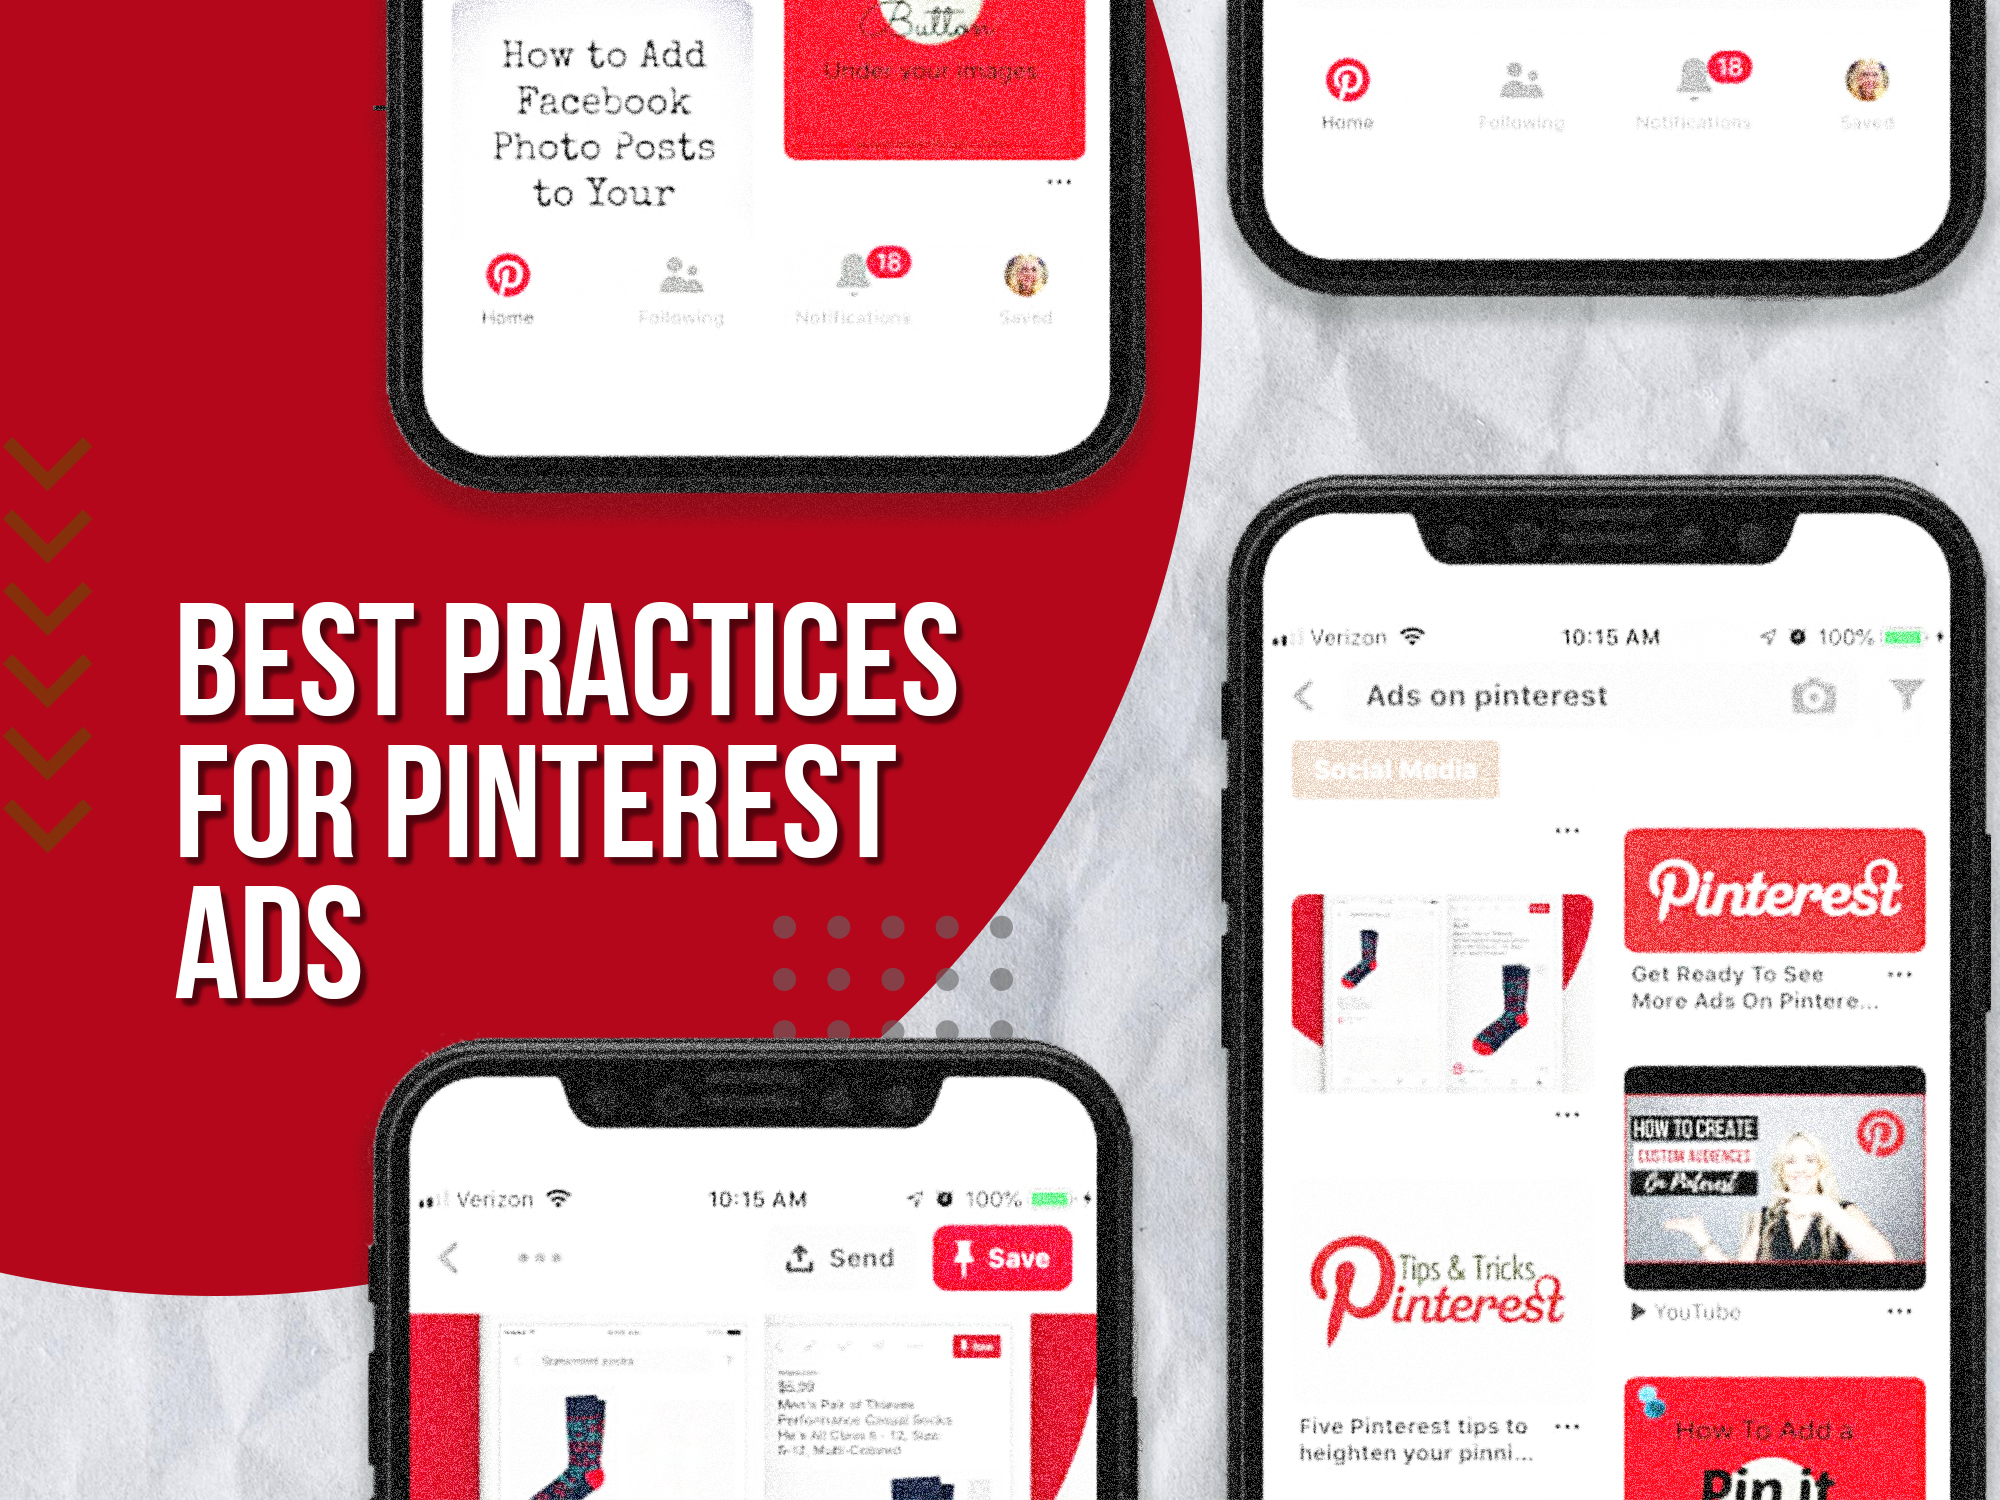 Best Practices For Pinterest Ads